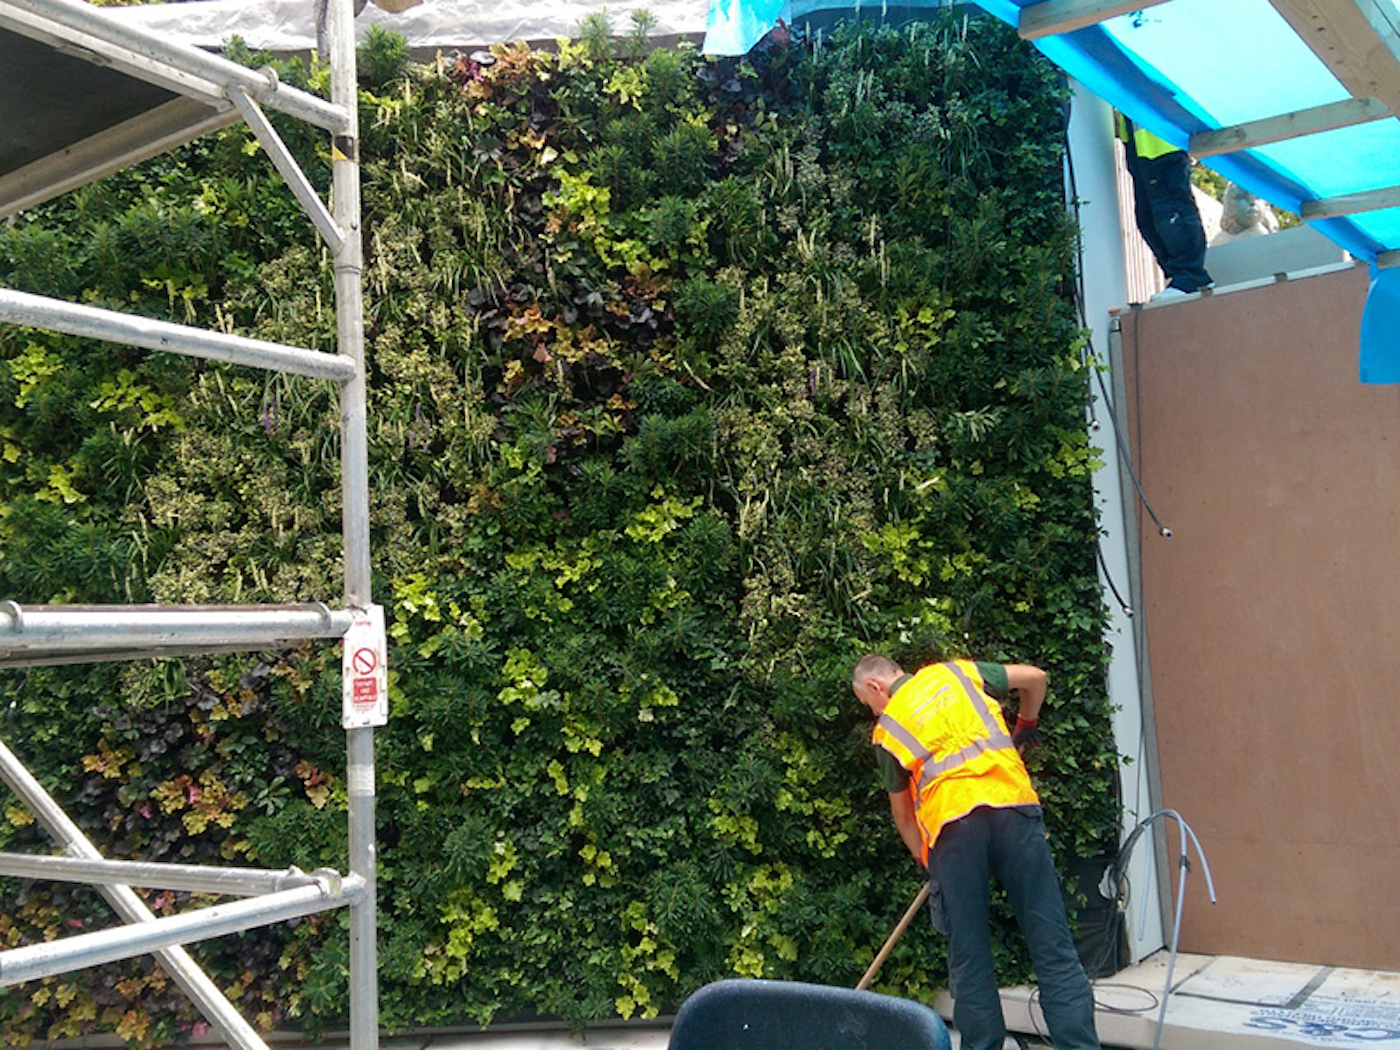 Installing The Living Wall At St Marychurch Street Private Residence